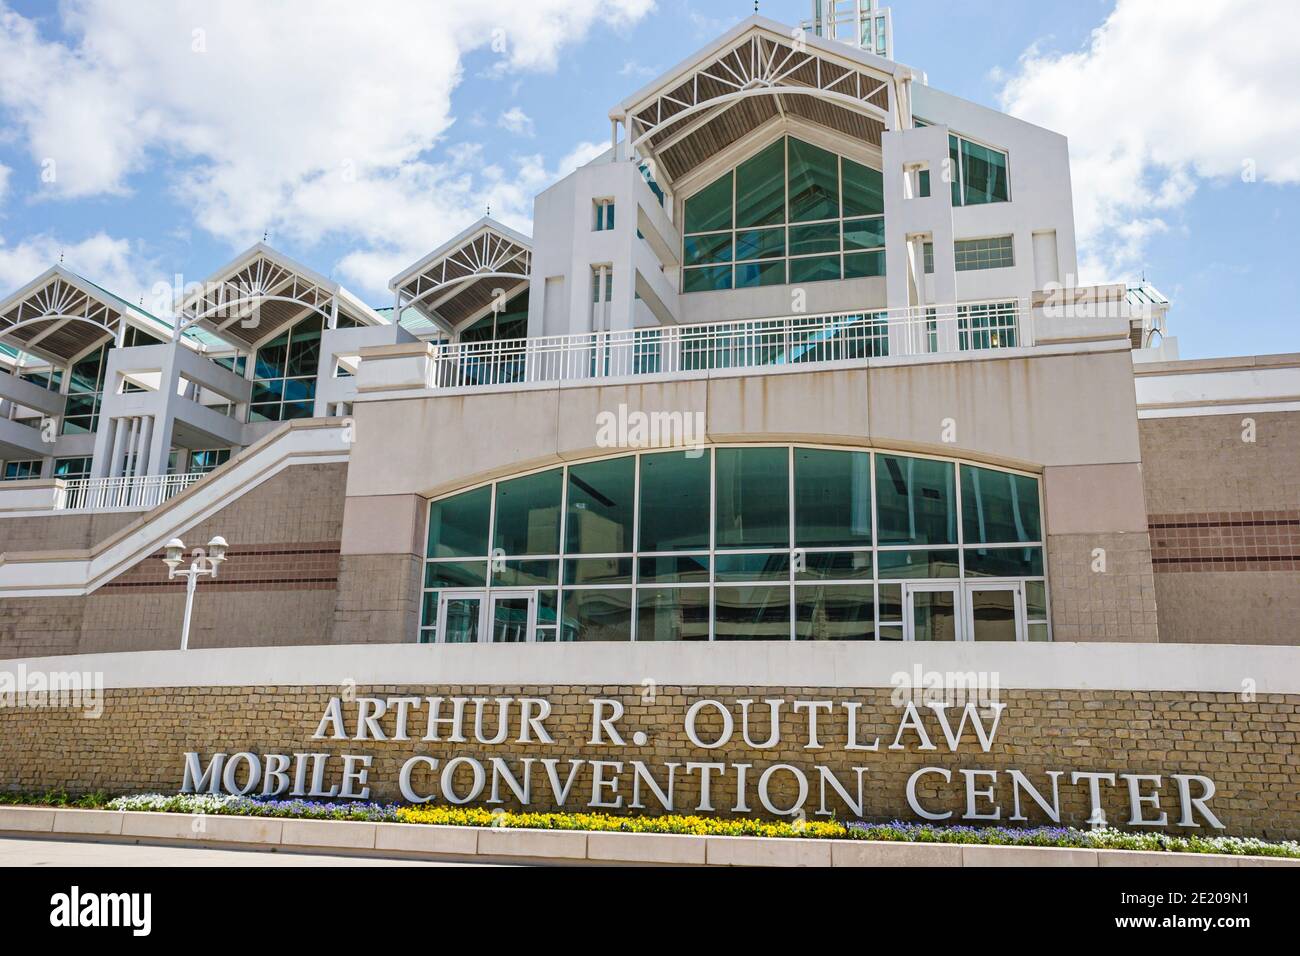 Alabama Mobile Water Street Arthur Outlaw Convention Center centre,outside exterior front entrance, Stock Photo